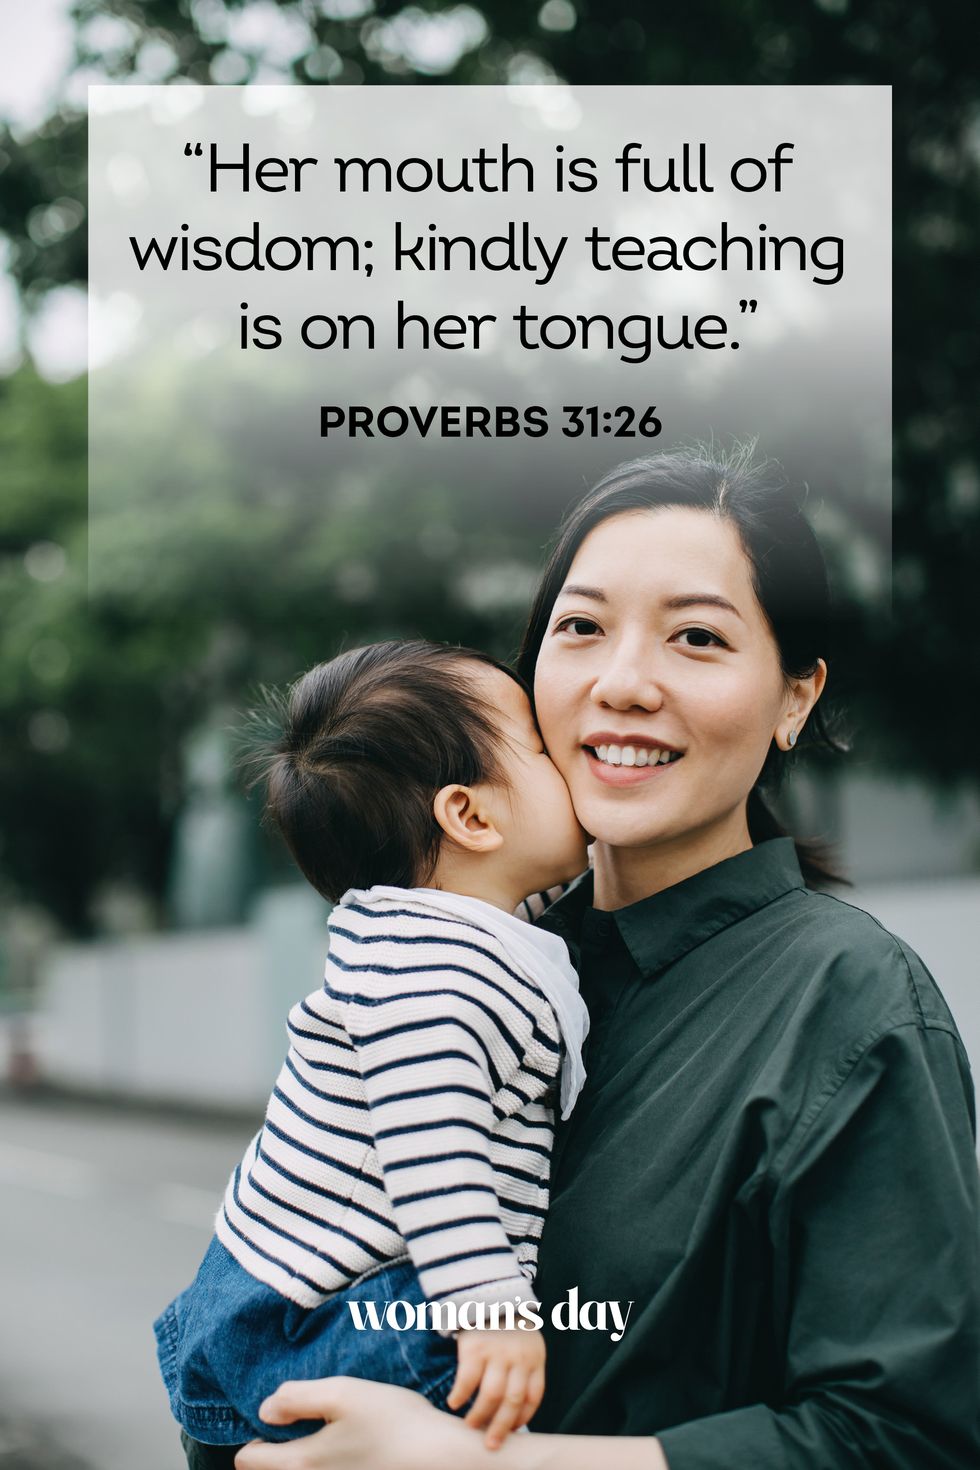 mothers day bible verses proverbs 31 26